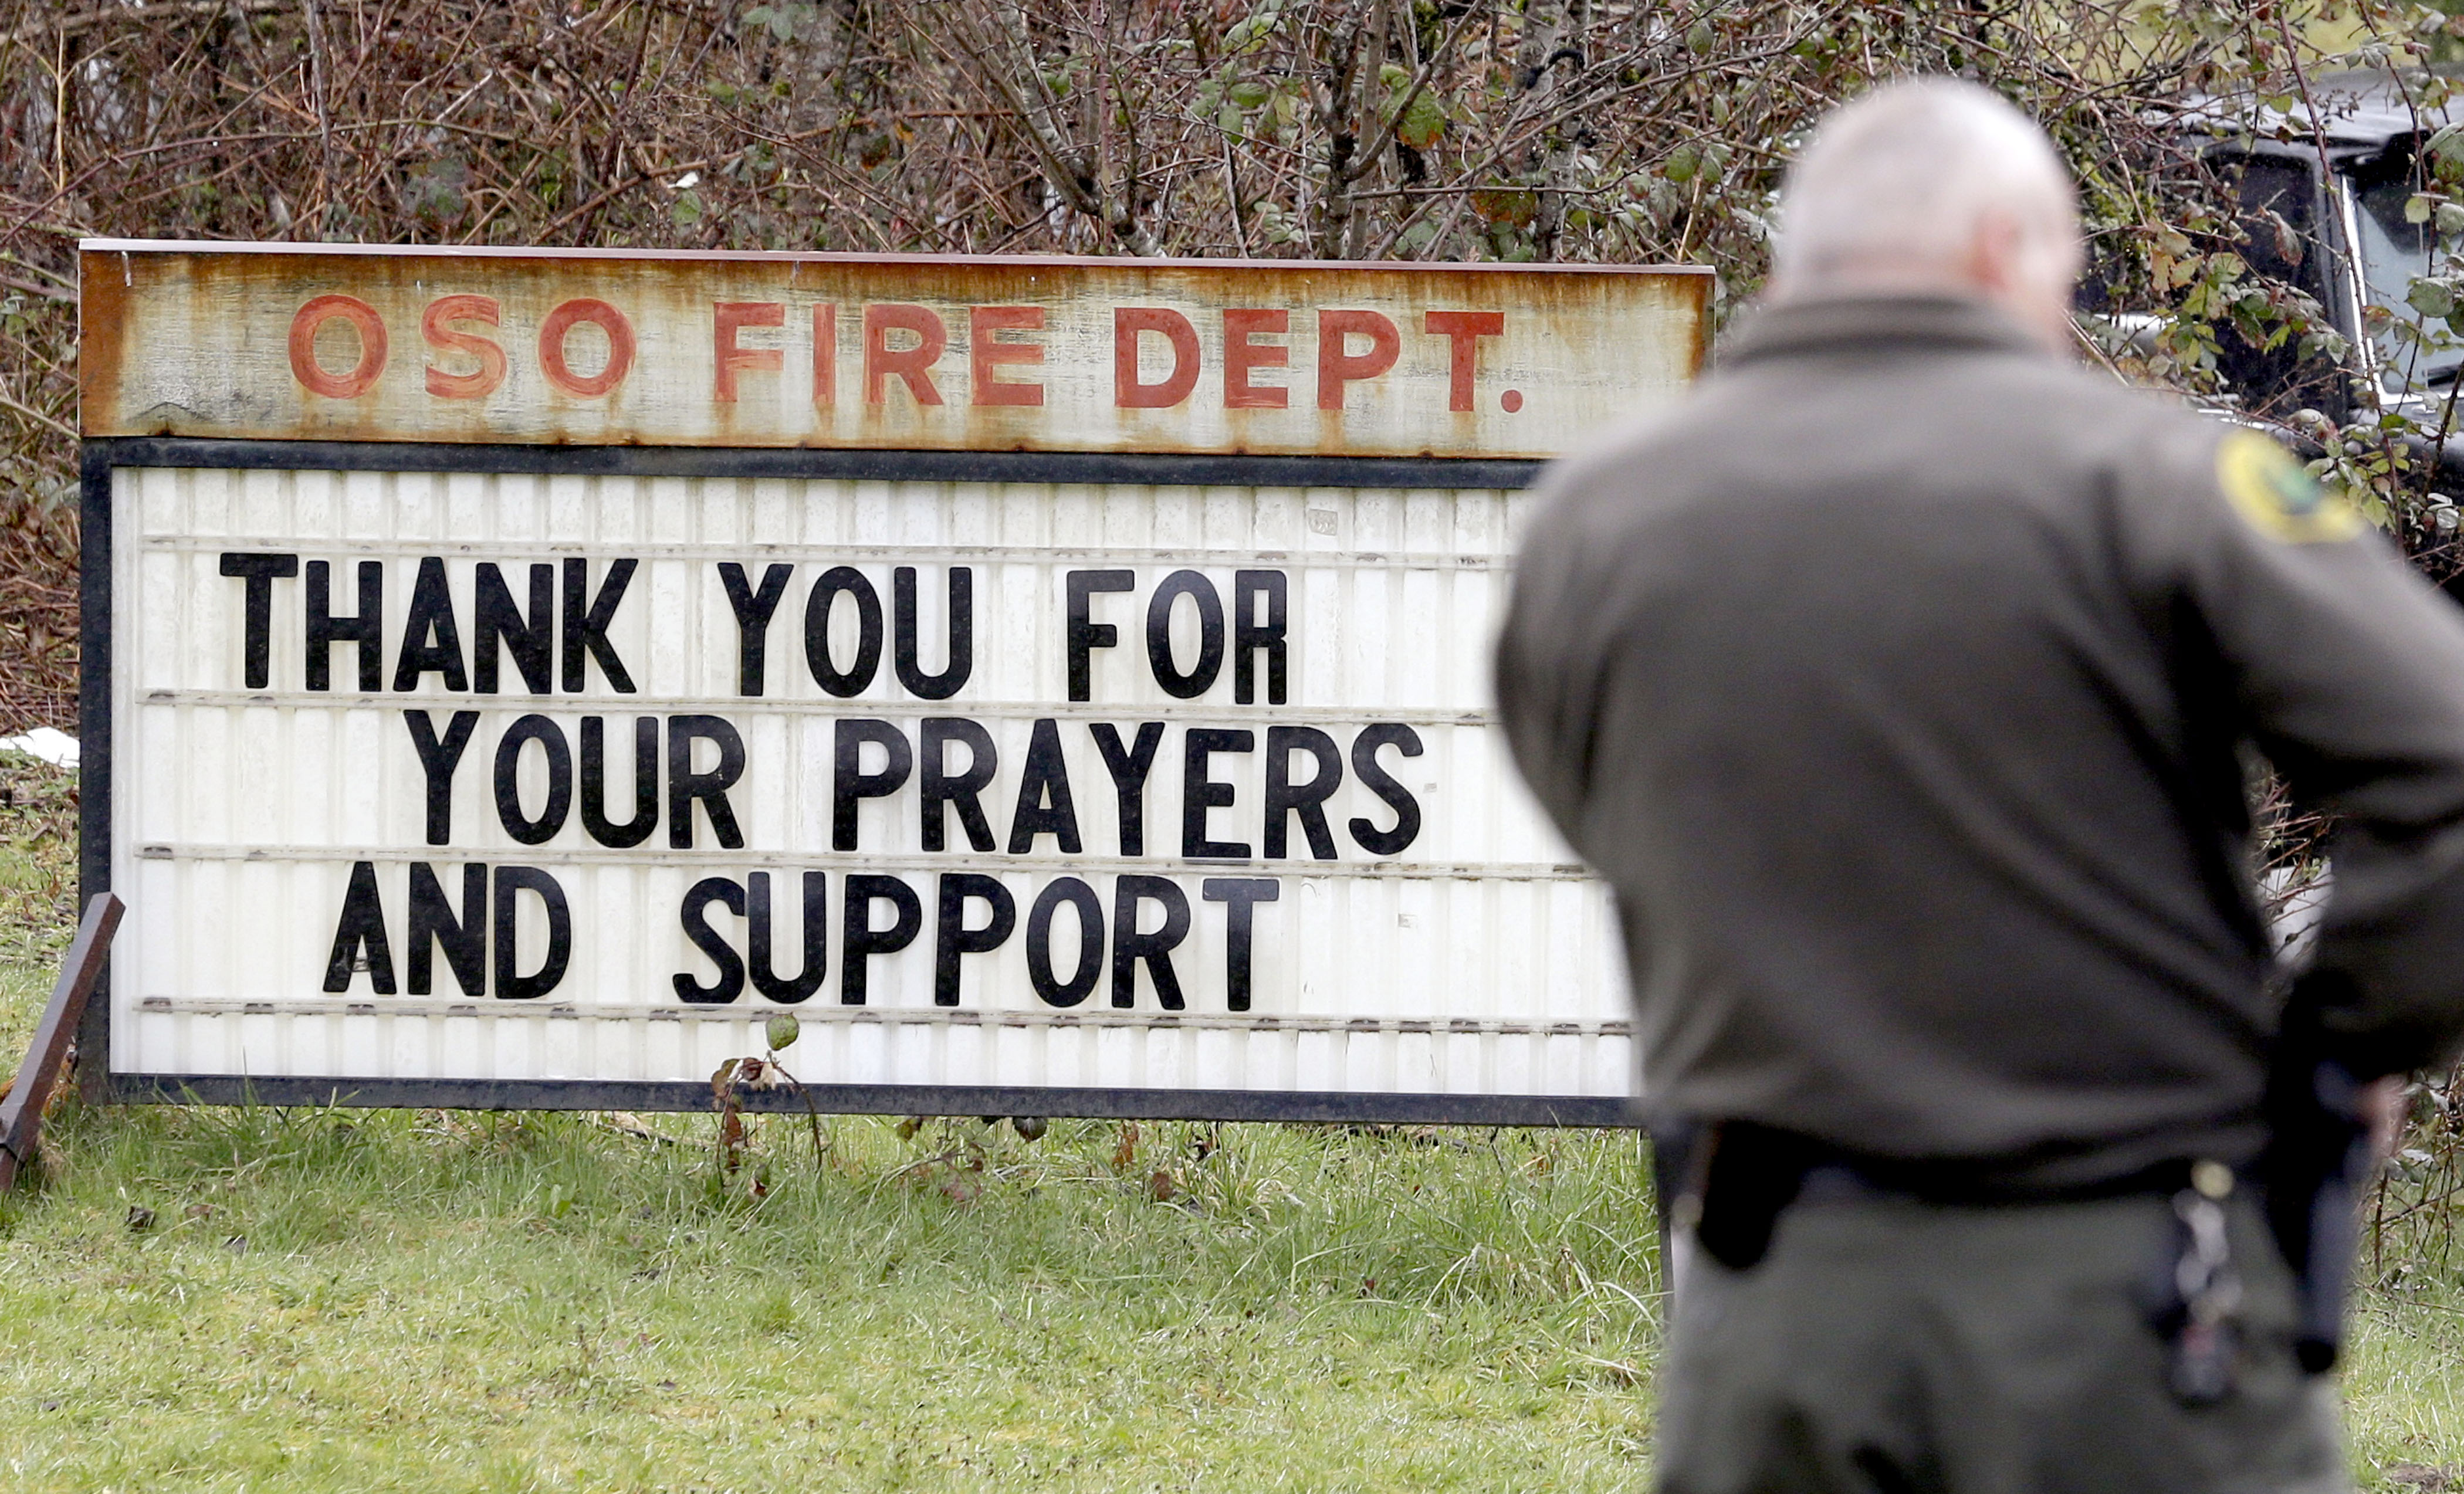 A sign outside the fire station in Oso on Thursday thanks people for support in the wake of the deadly mudslide. — Photo by Elaine Thompson/The Associated Press